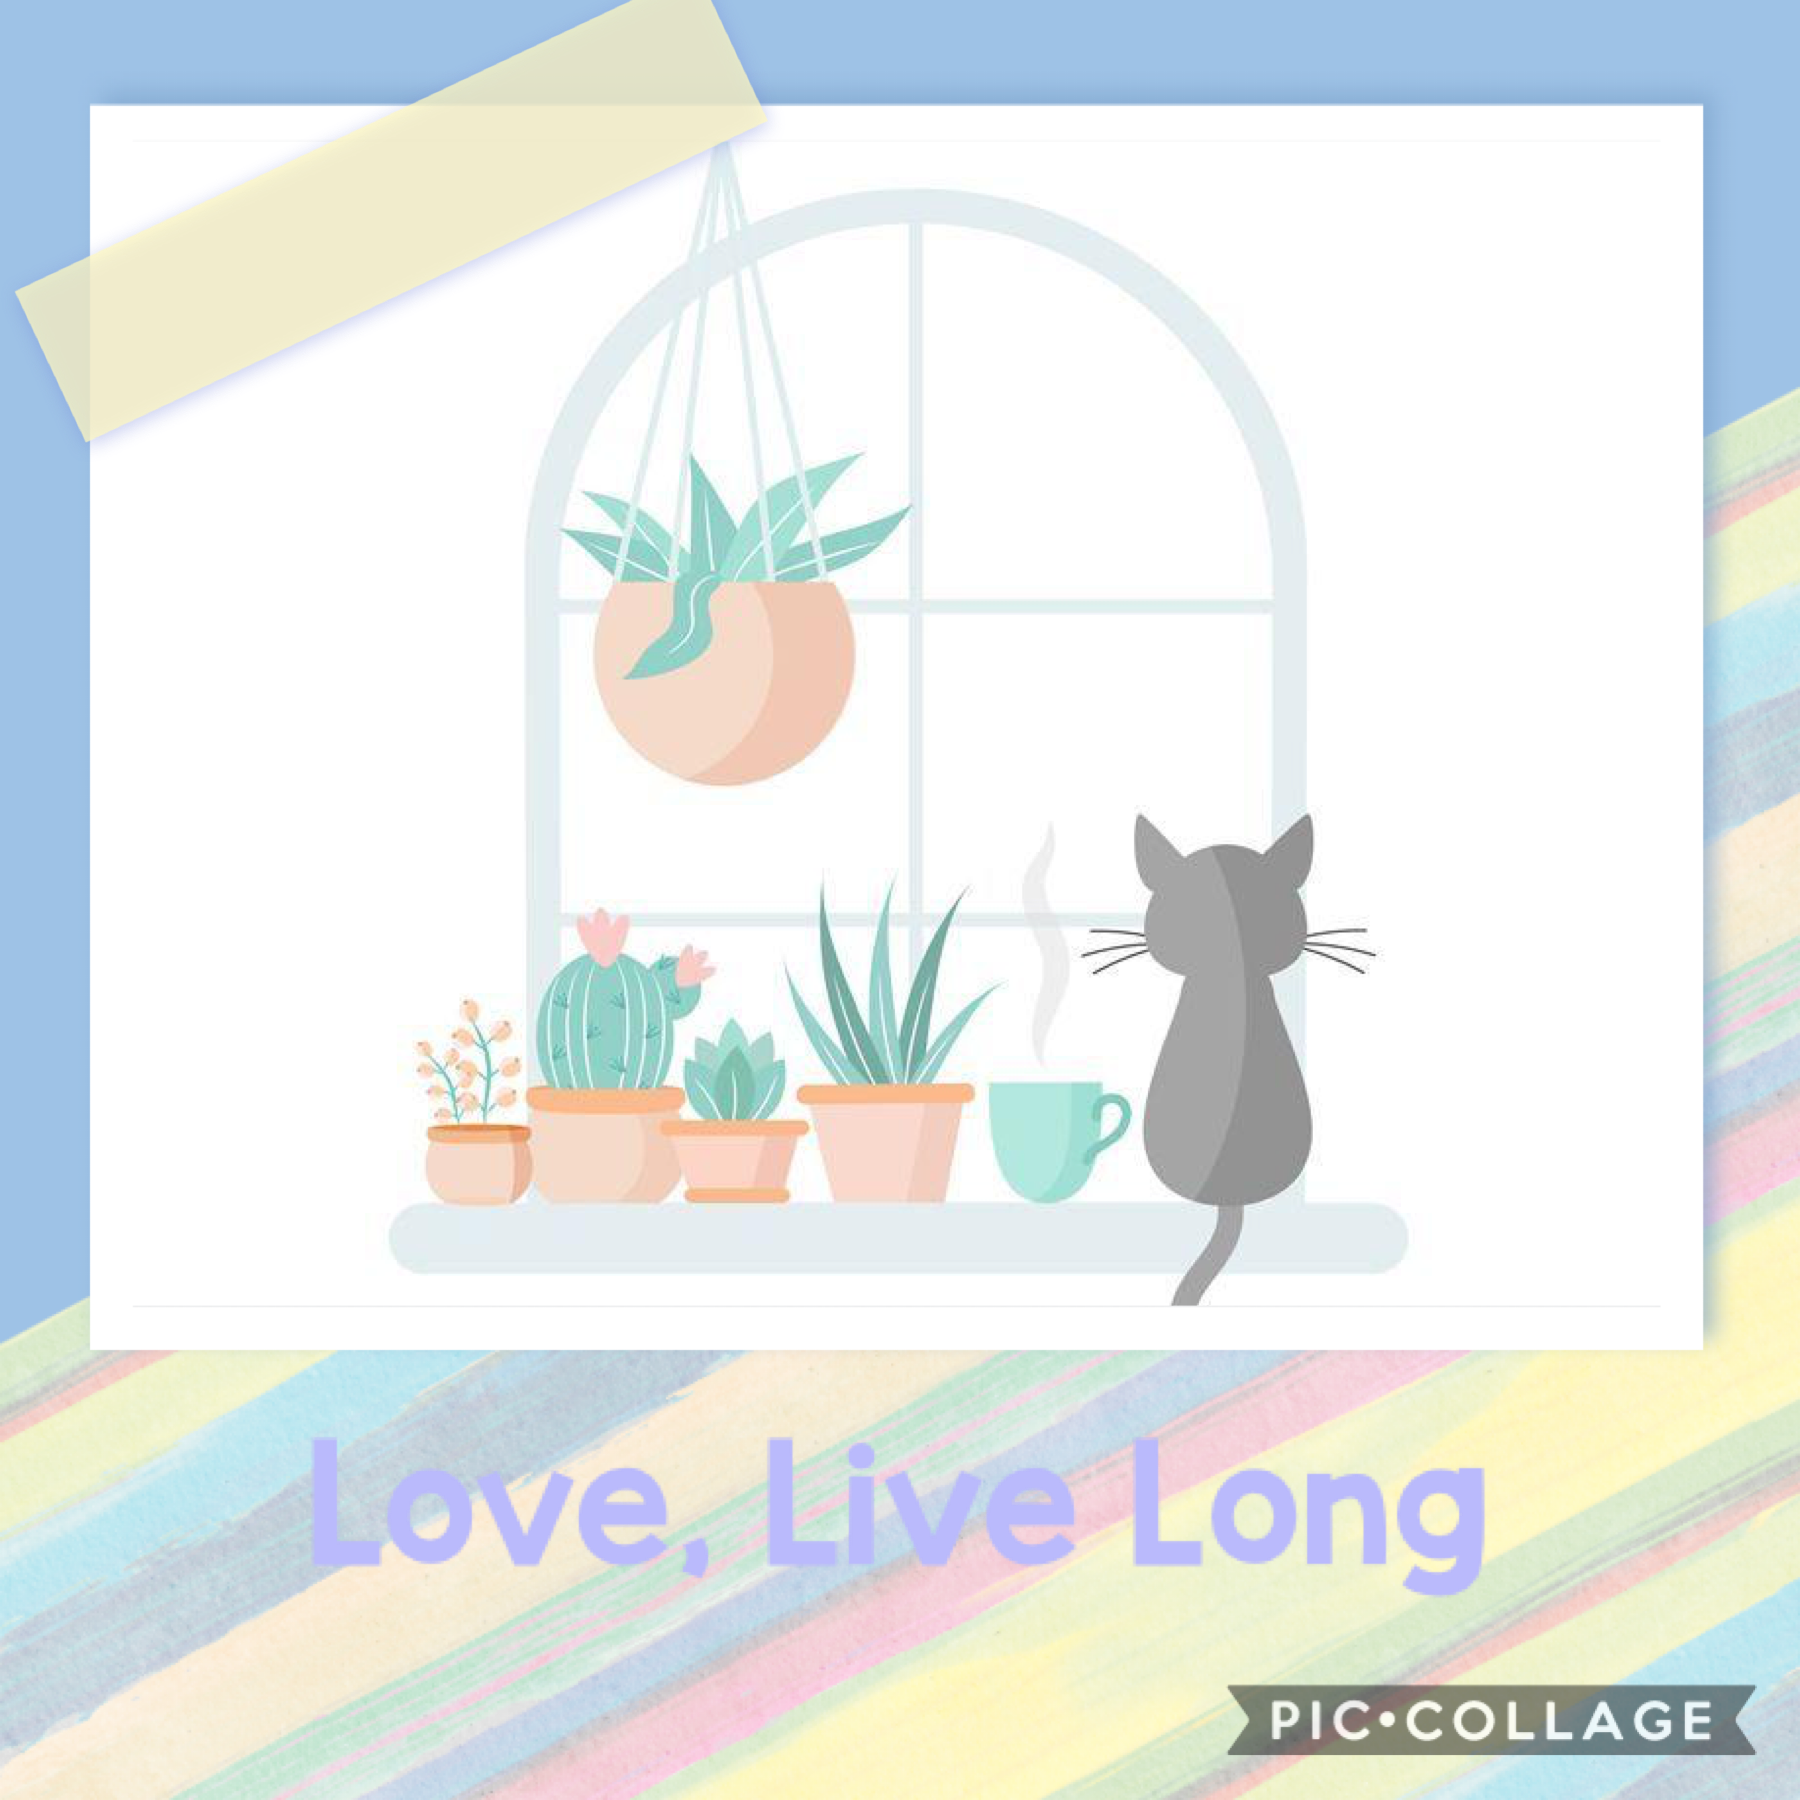 Love and live long